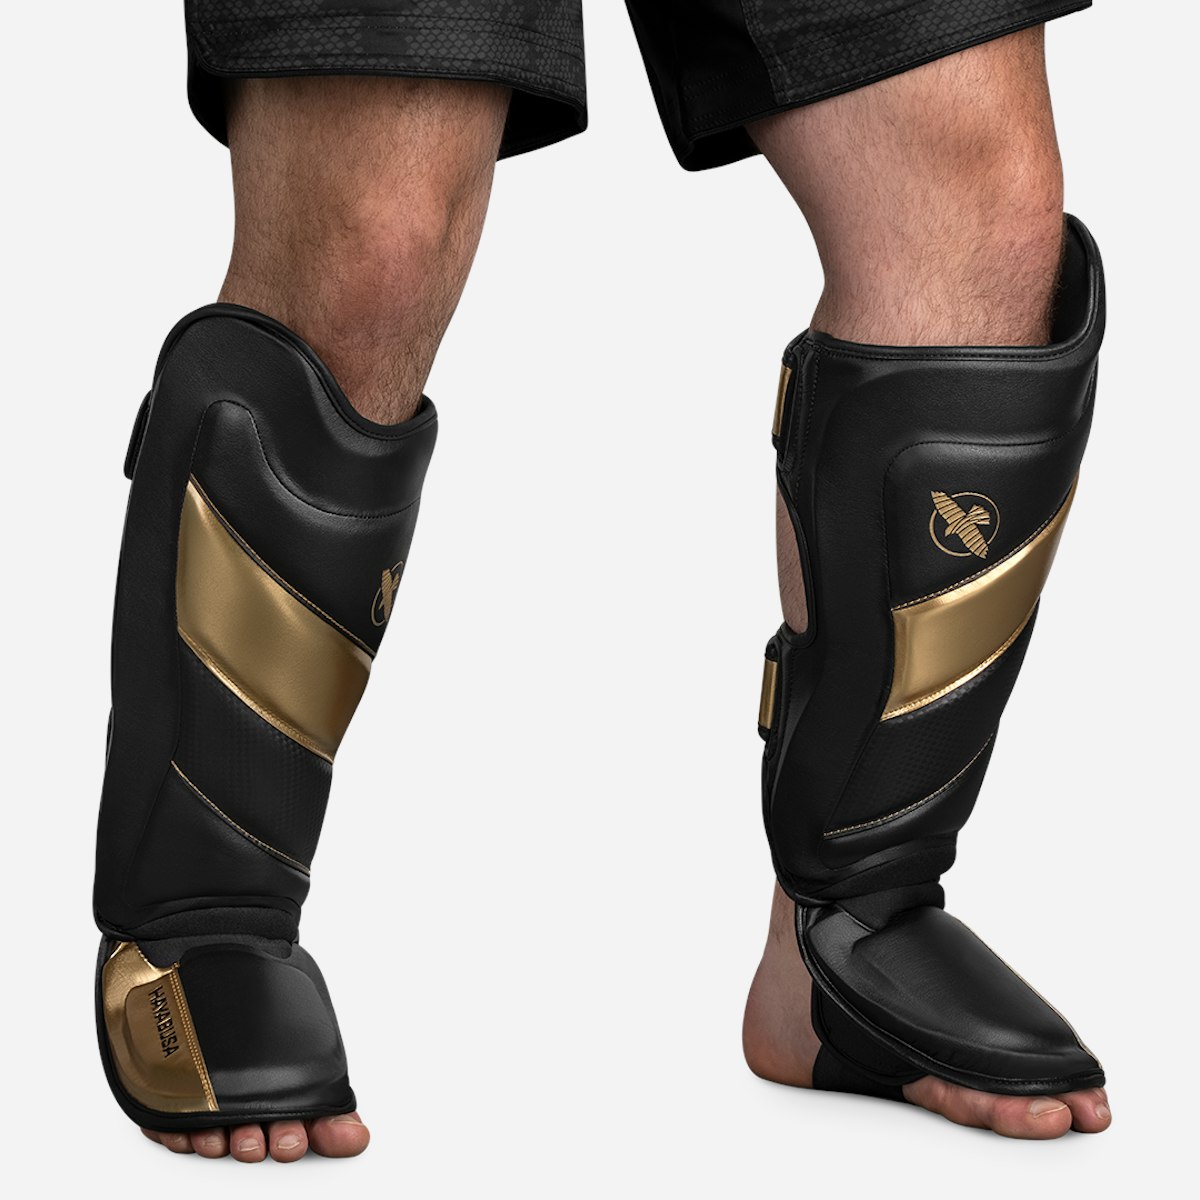 Carbon Athletic - The Gold Standard in Shin Guard Protection 